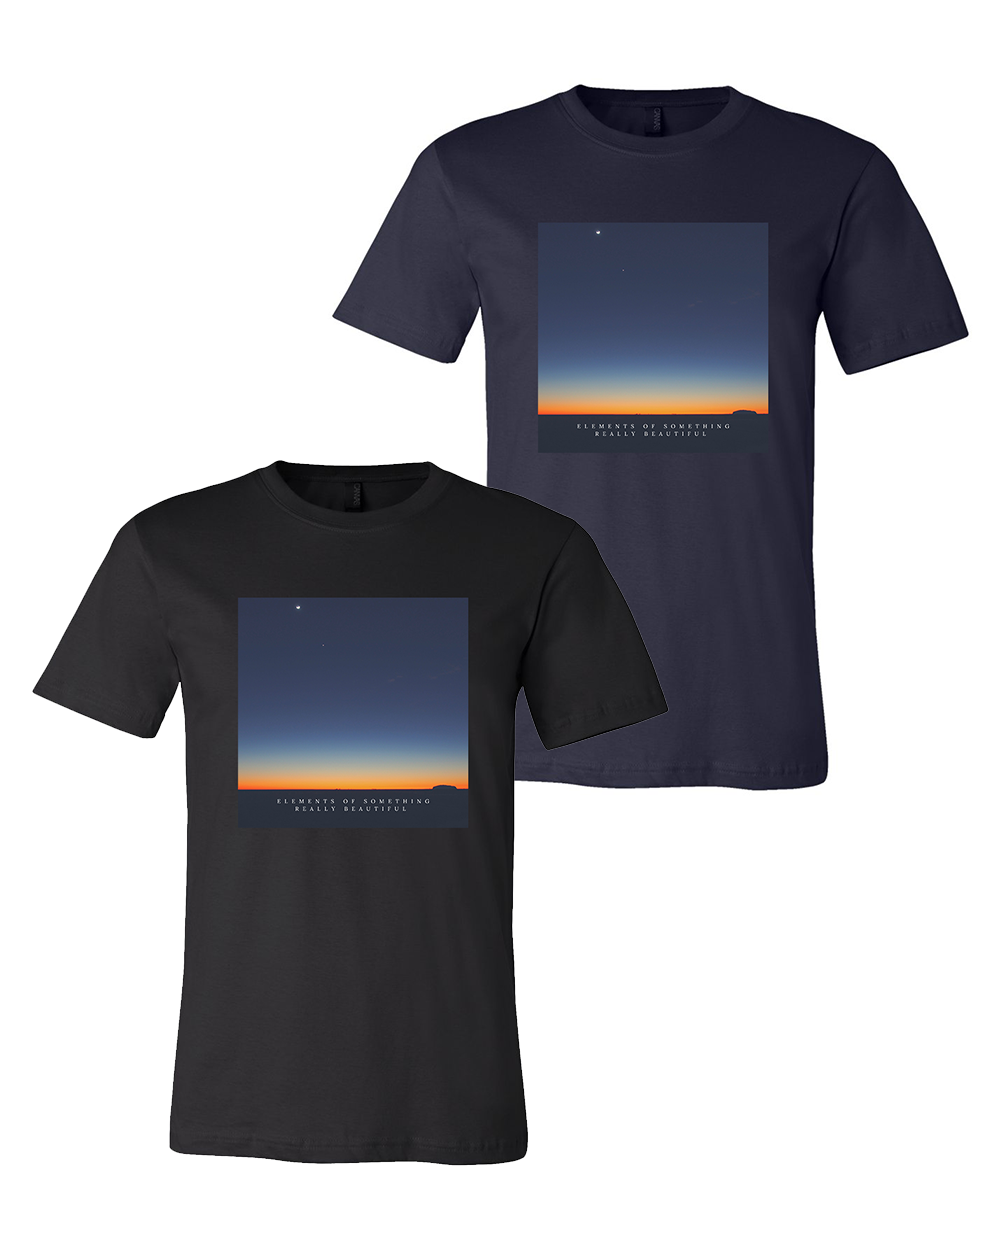 Elements of Something Really Beautiful : Sky Tee